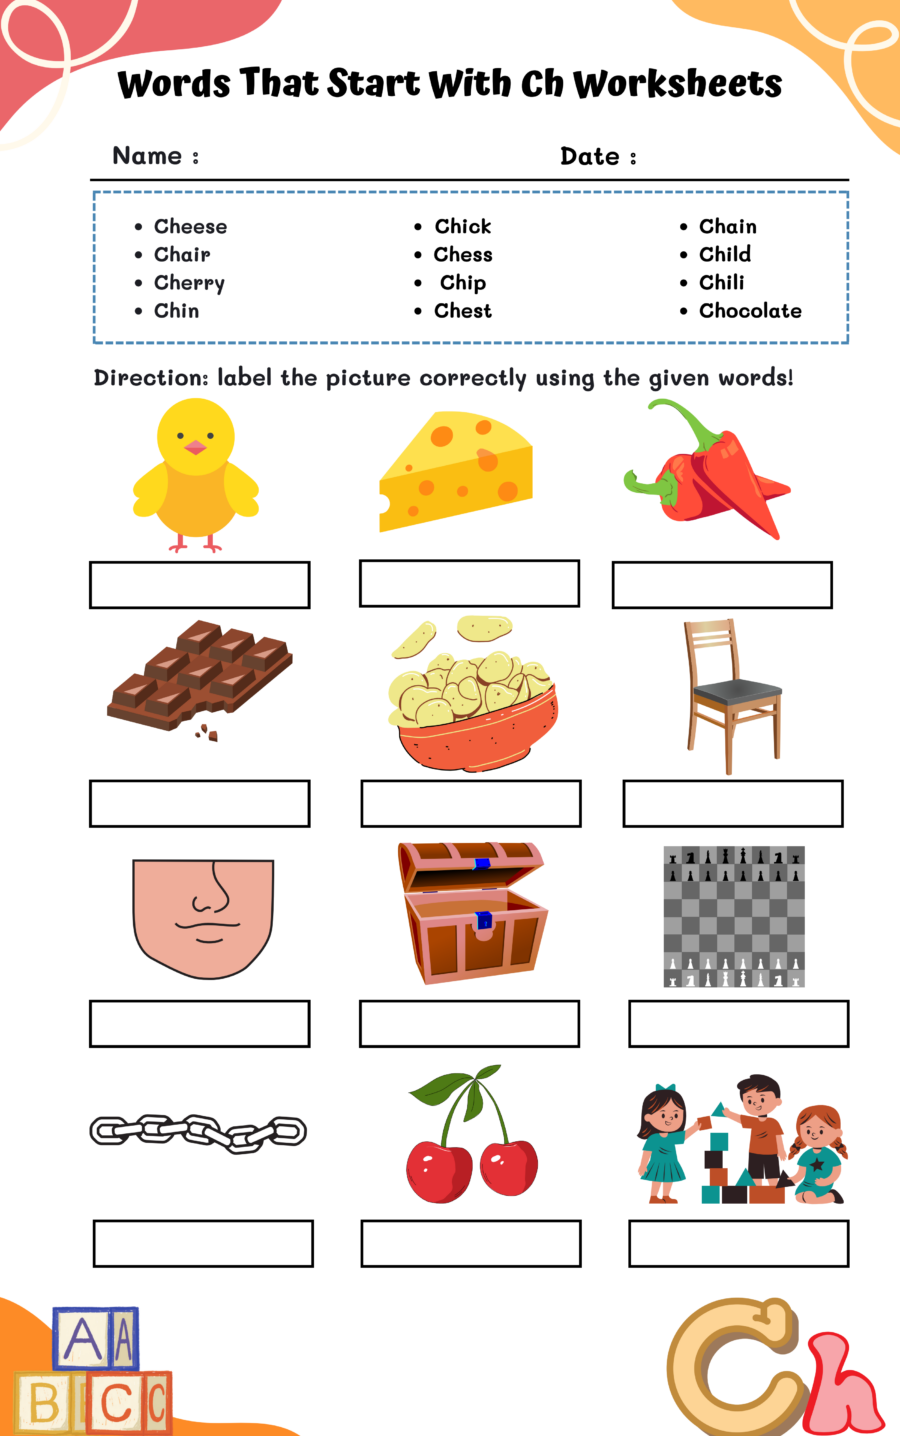 Words That Start With Ch Worksheet